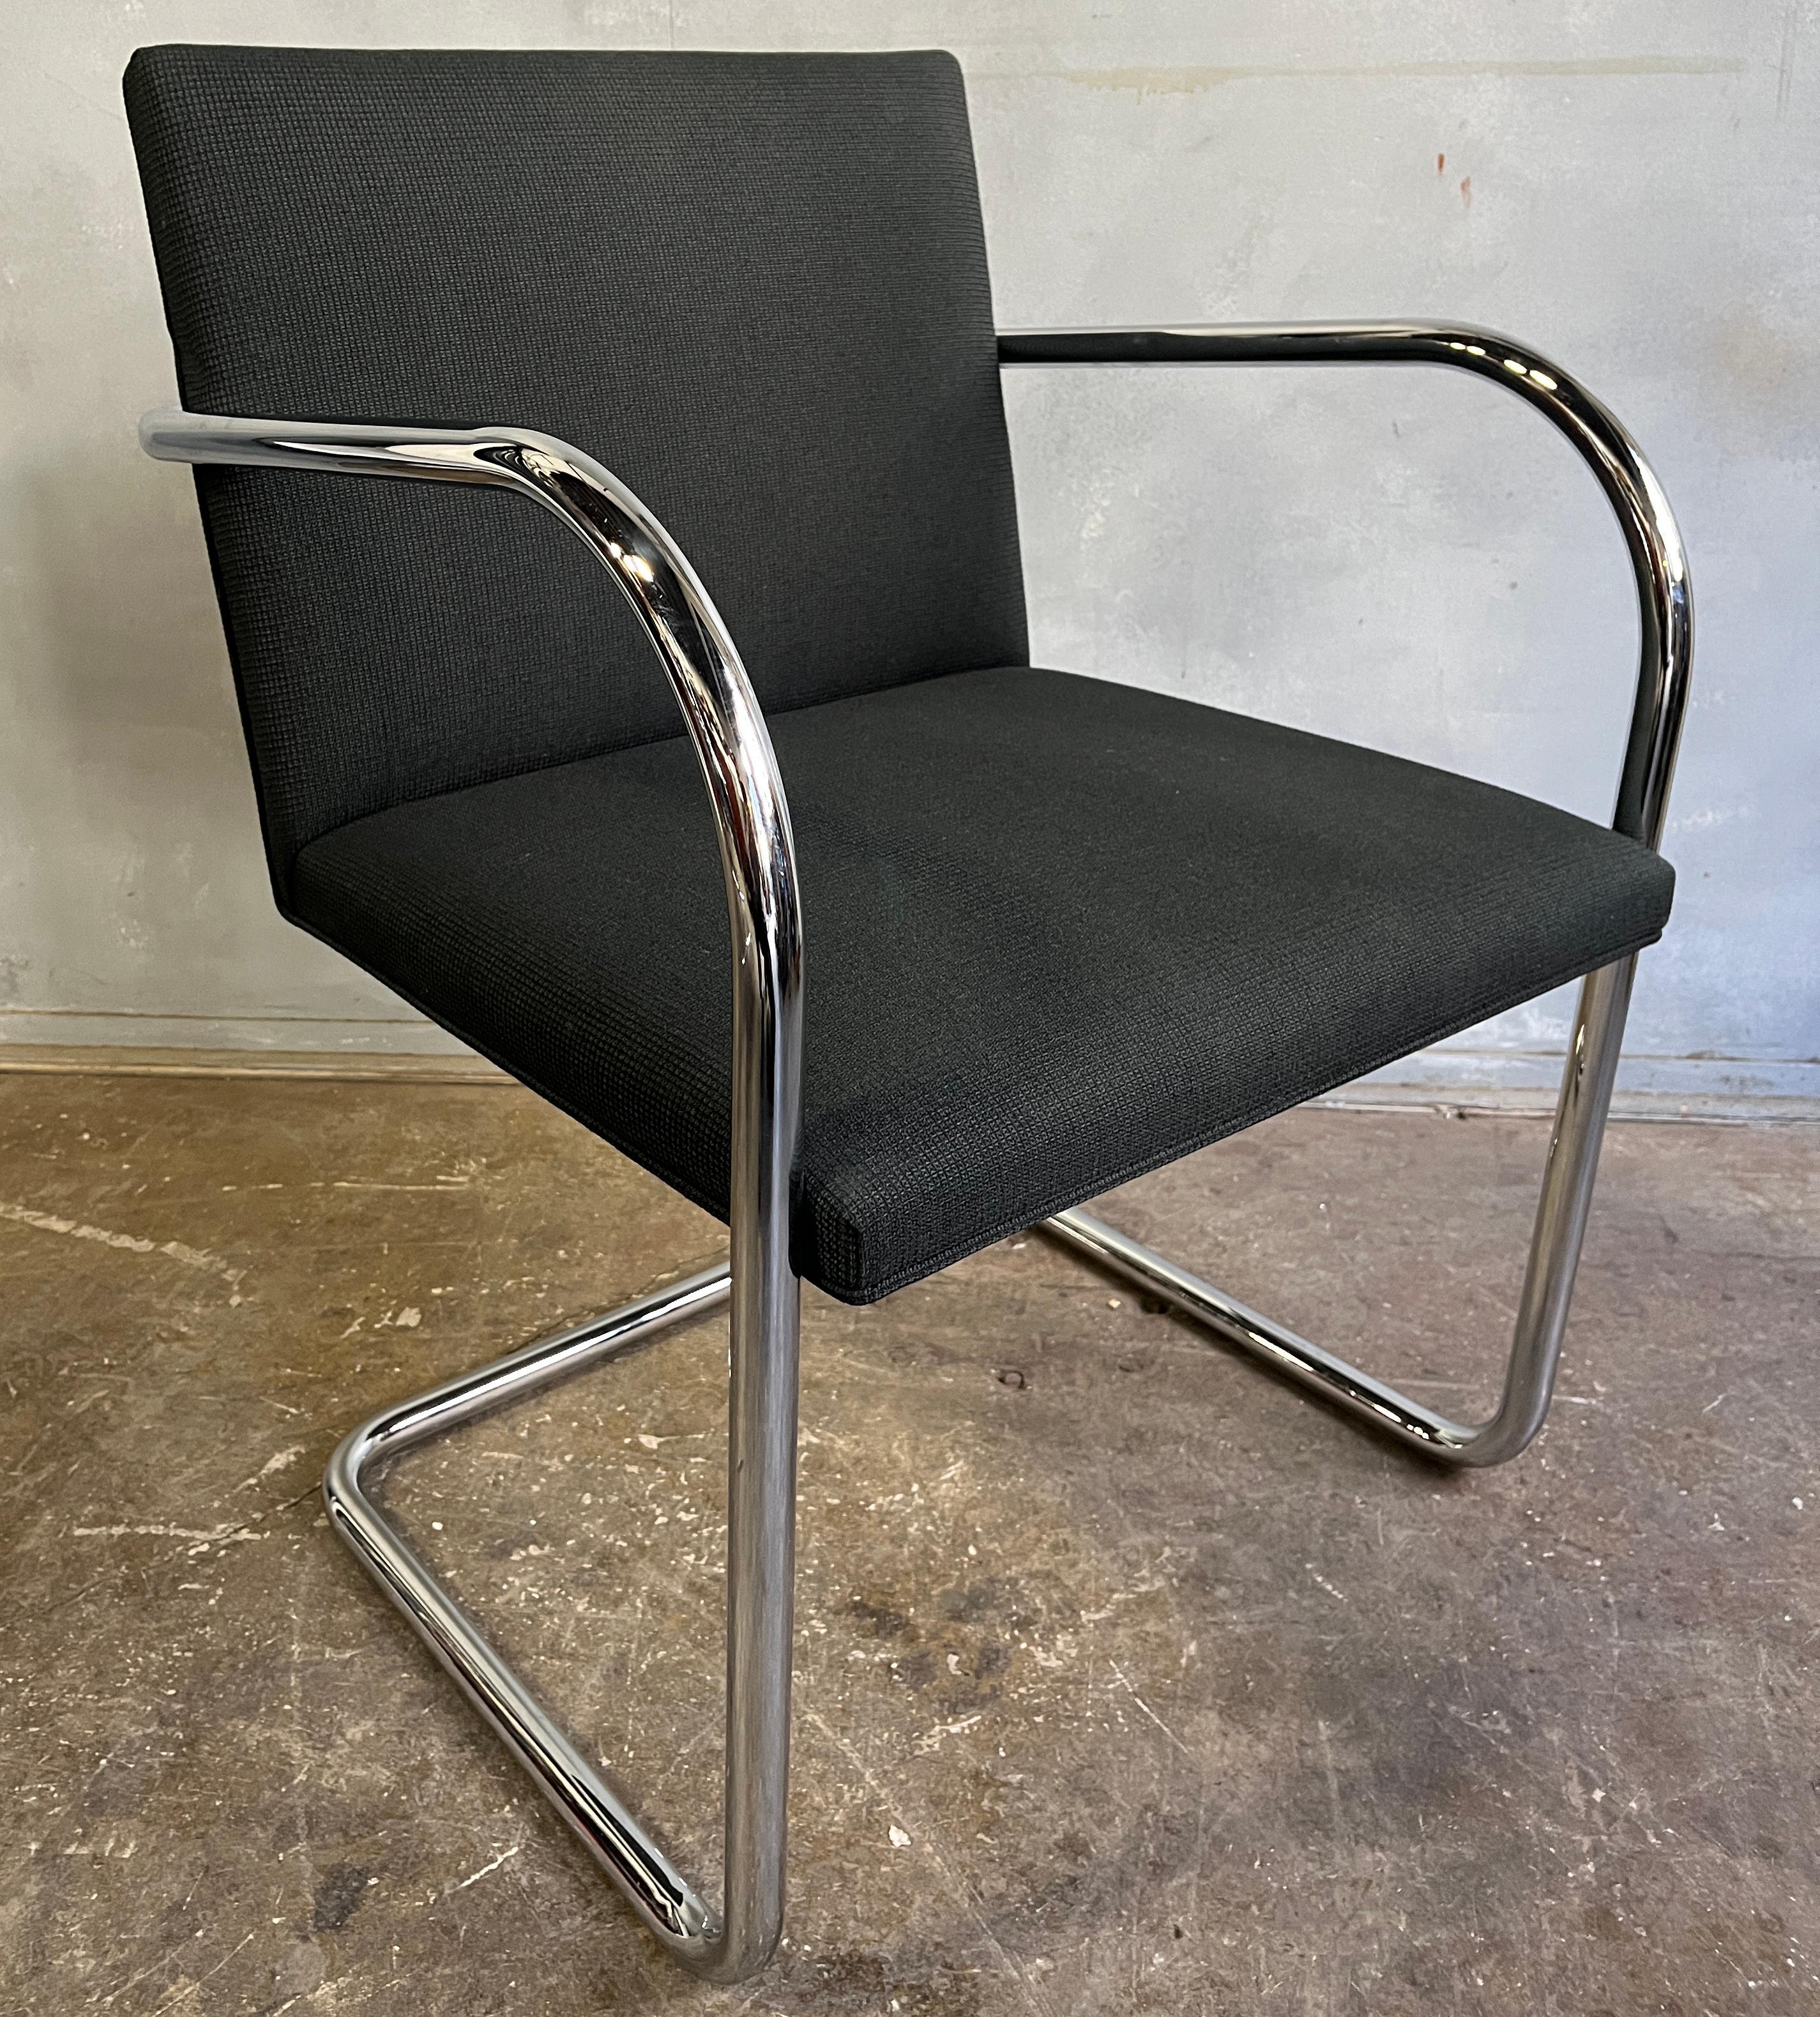 20th Century Midcentury Knoll Brno Chairs by Mies Van Der Rohe in Black 30 Available For Sale